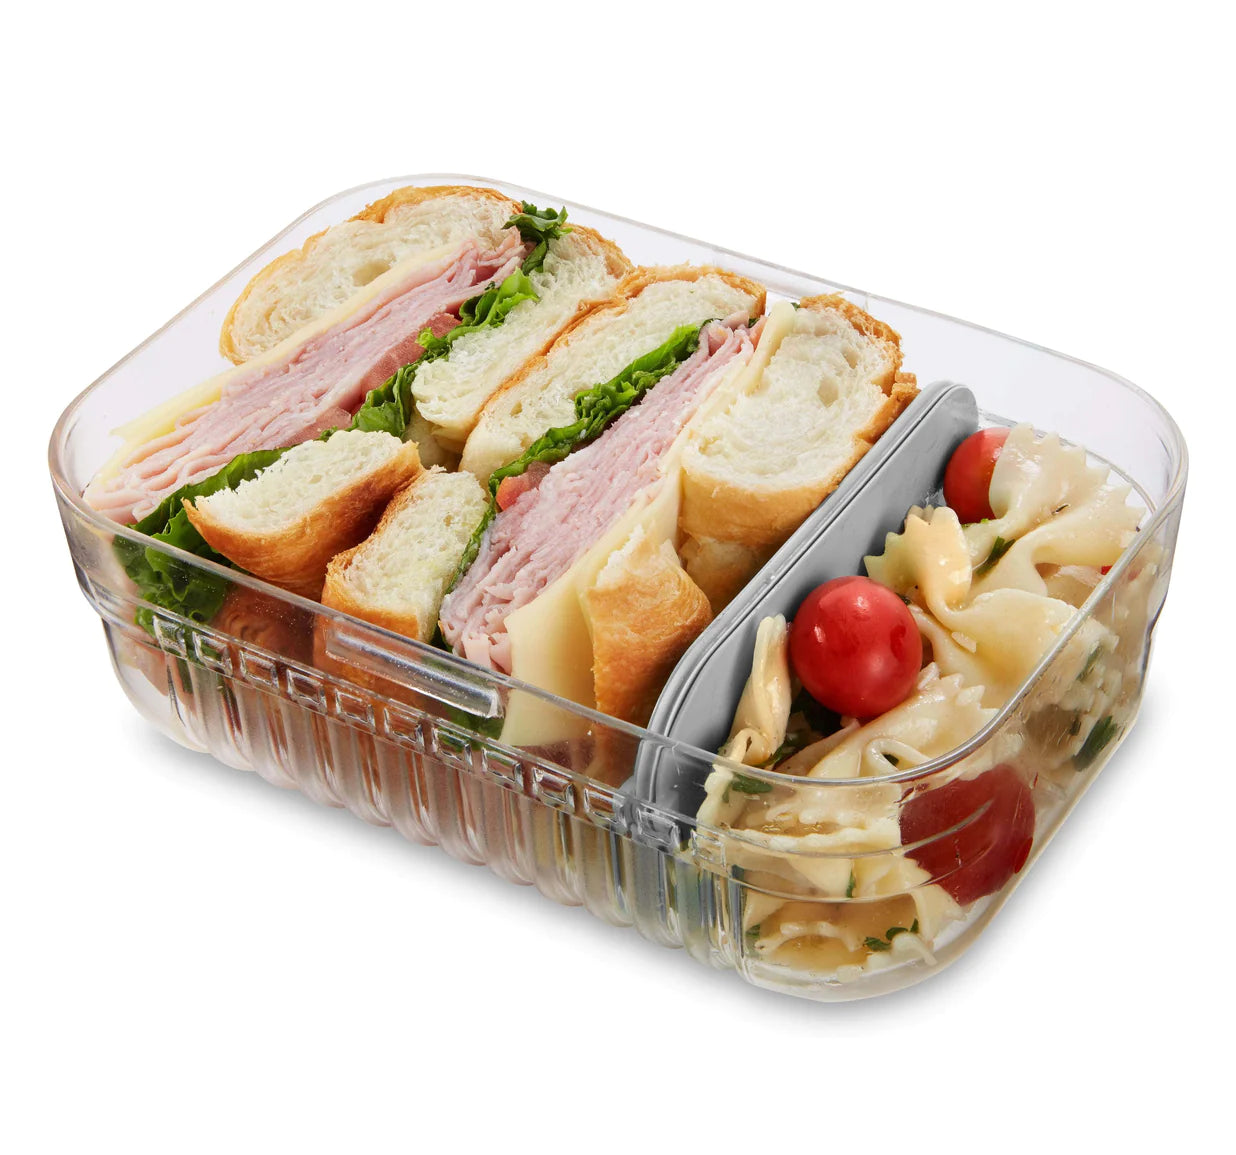 ERGO Packit Bento Lunch Box | Purchase at The Green Collective